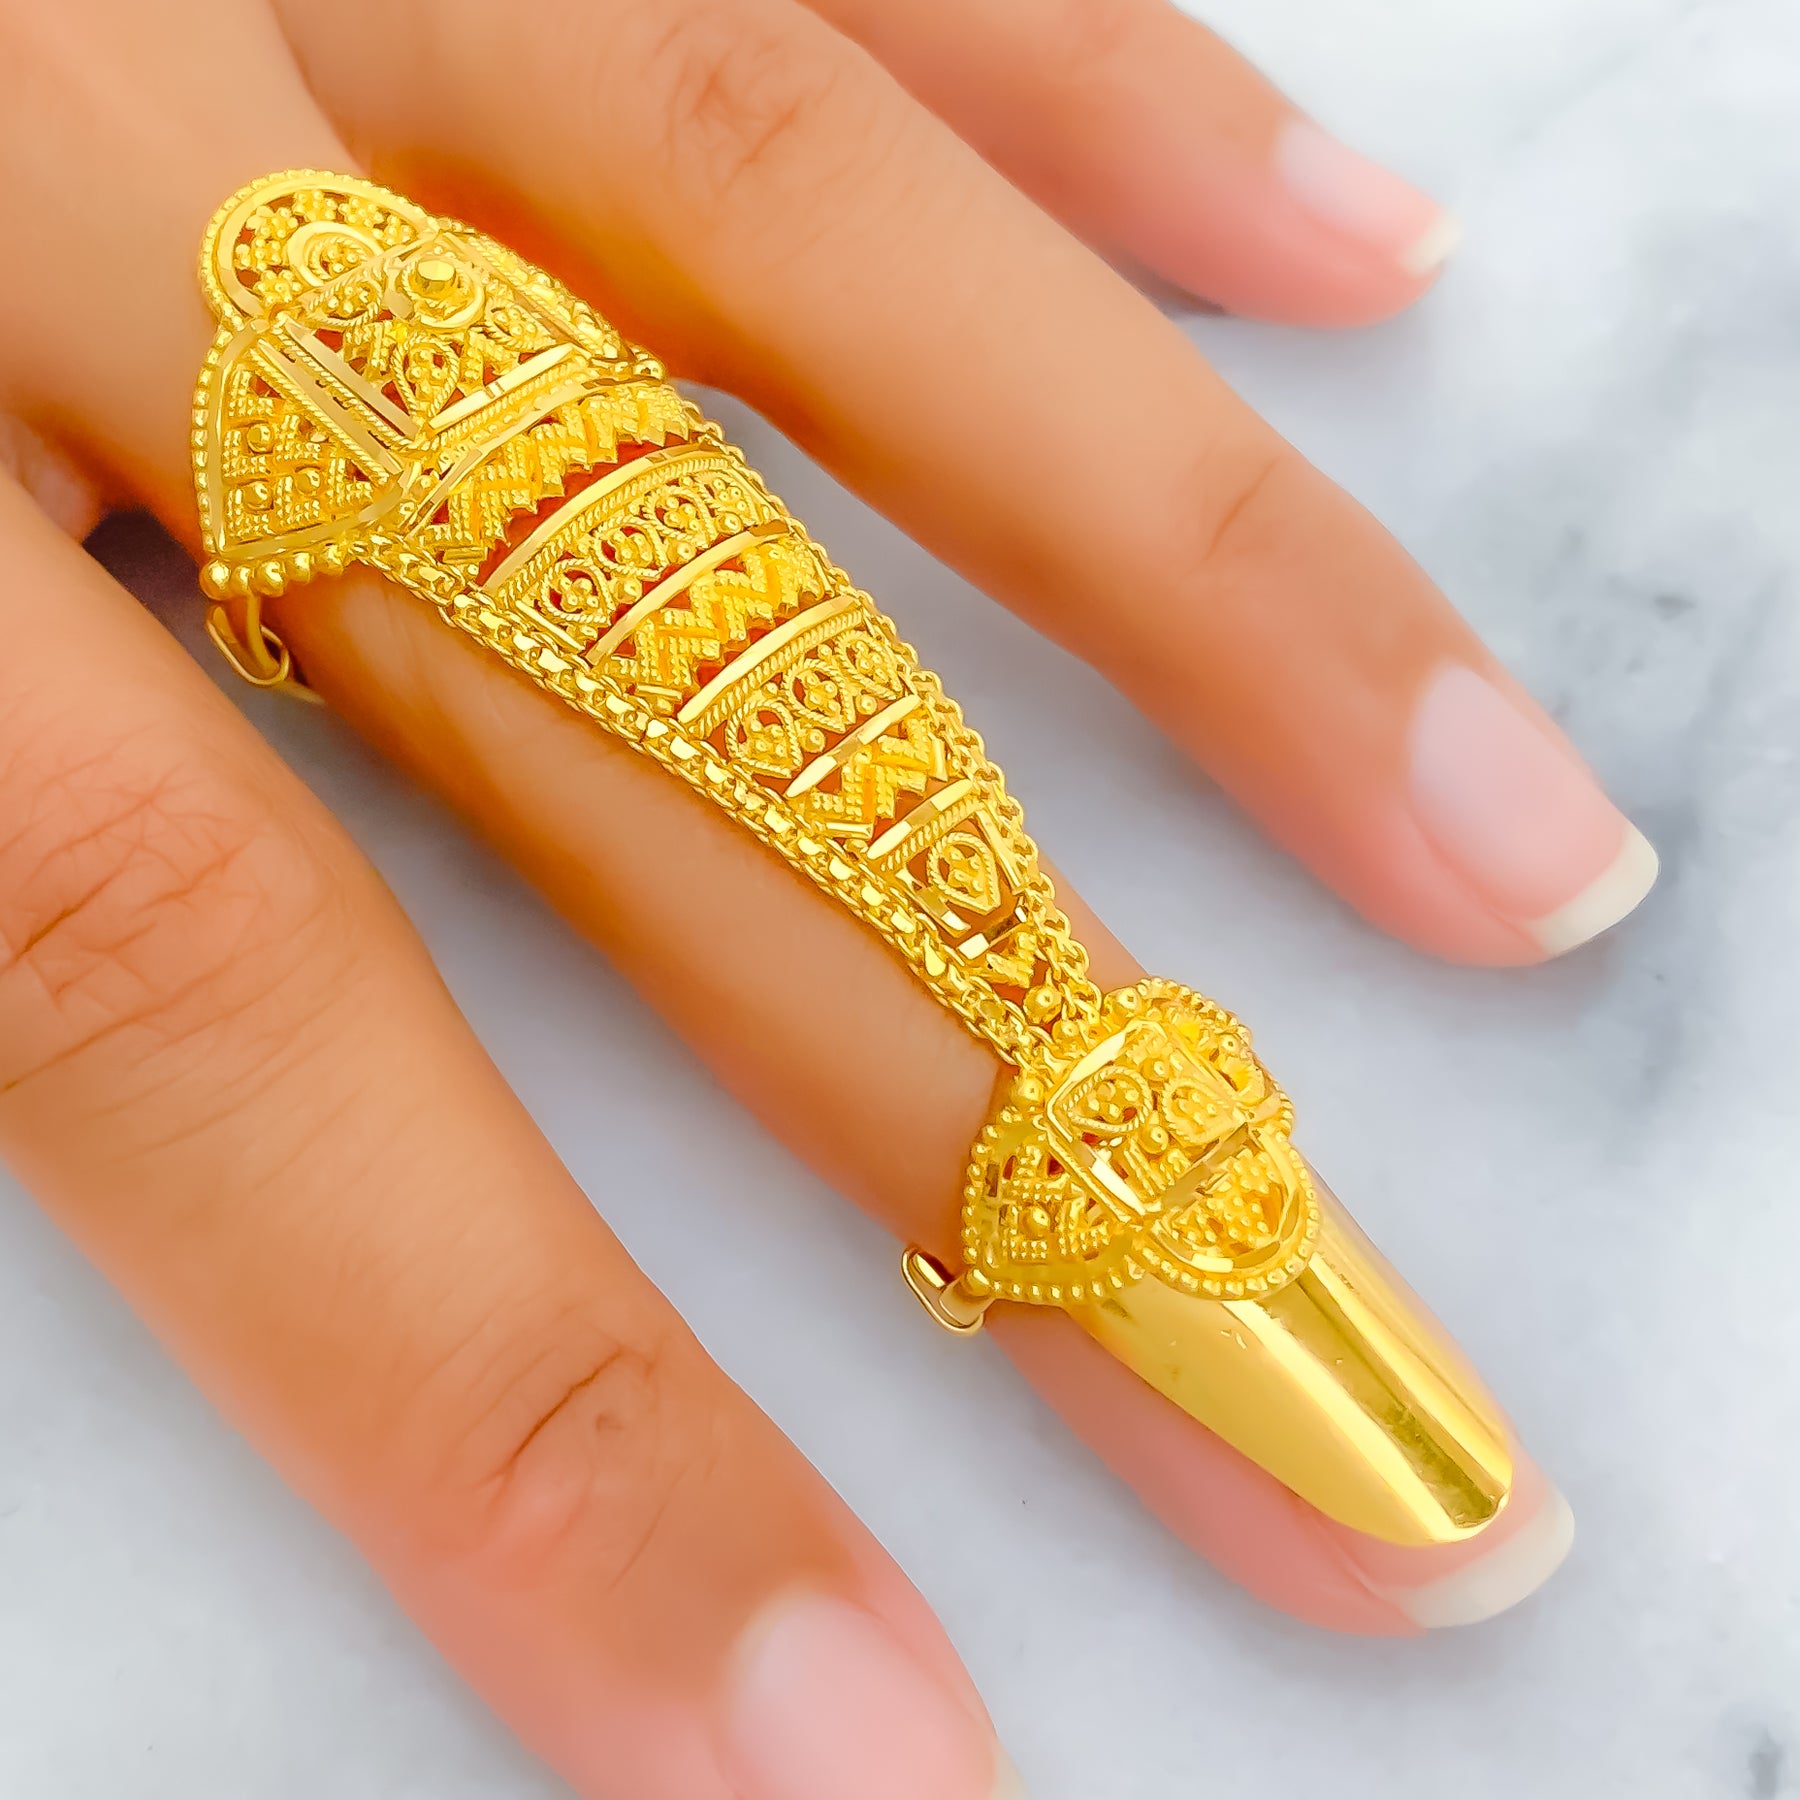 Butterfly Ring Female Design Fashion Index Finger Advanced Feeling Cool  Personality Open Ring Jewelry Rings Adjustable Rings For Women Rings Silver  - Walmart.com